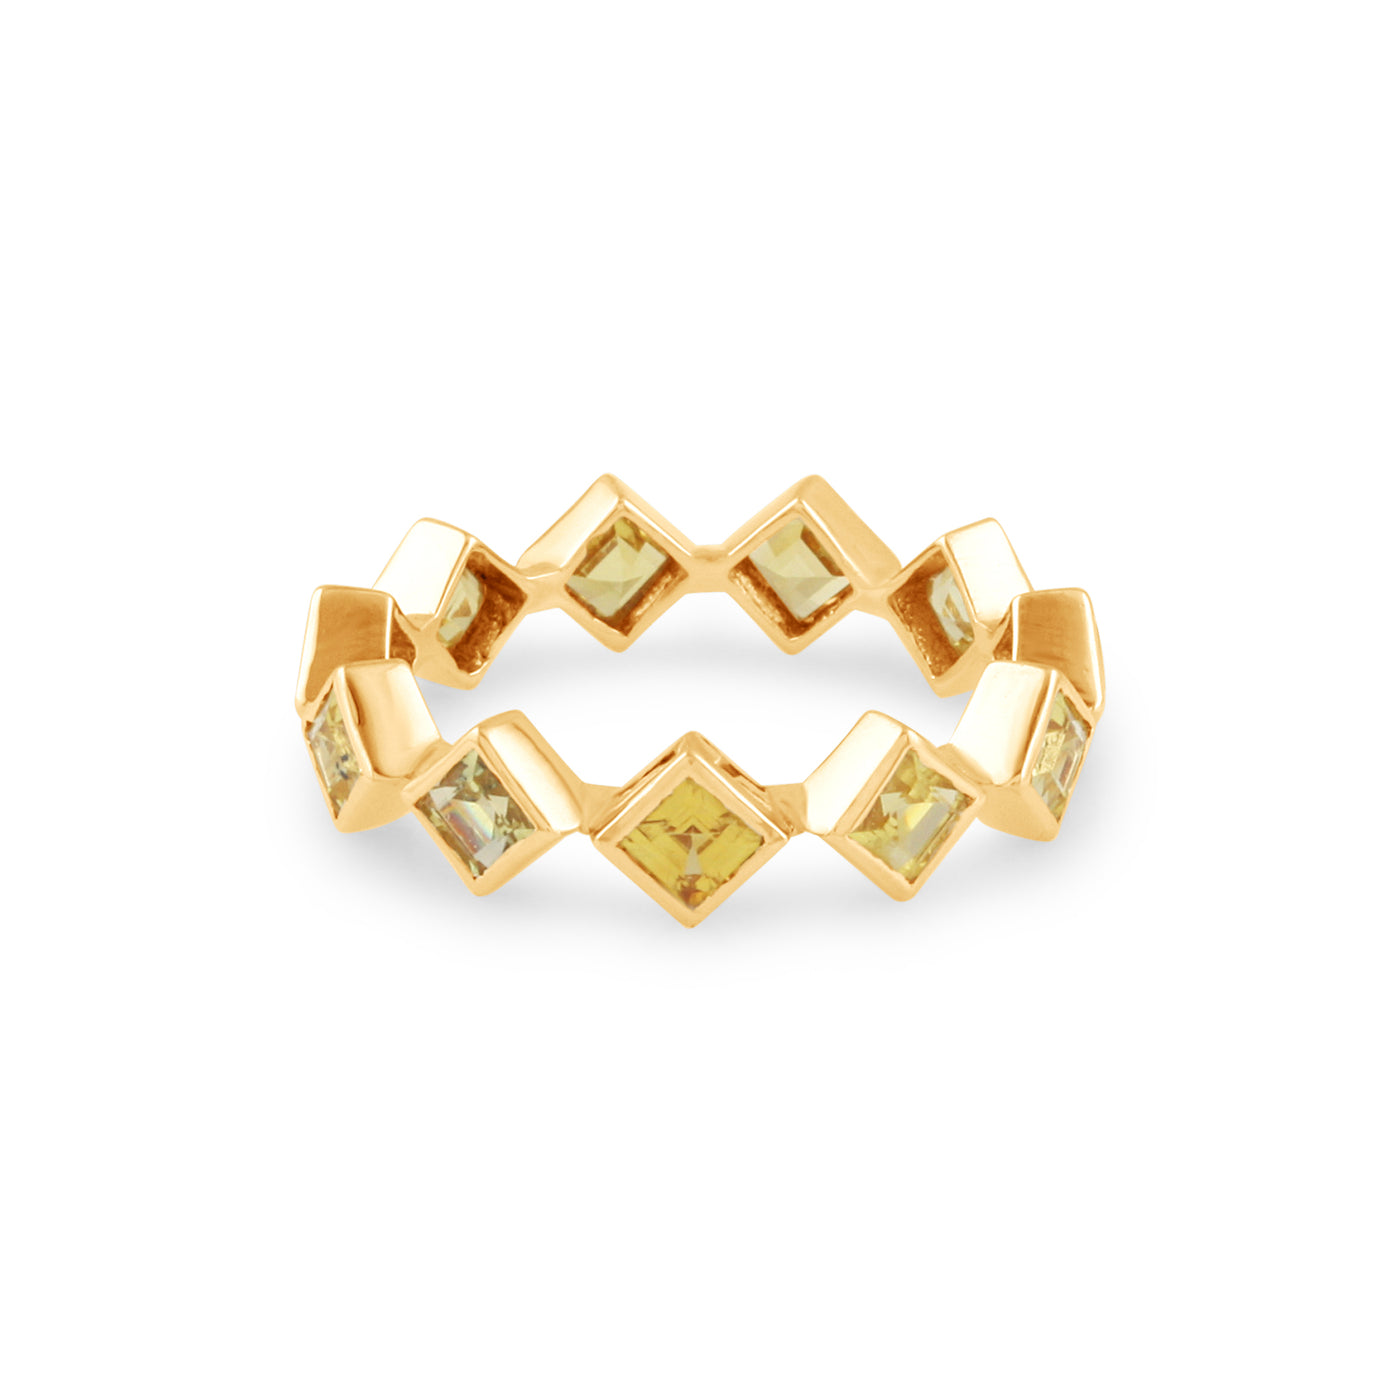 Gemstone Square Ring In 18K Yellow Gold